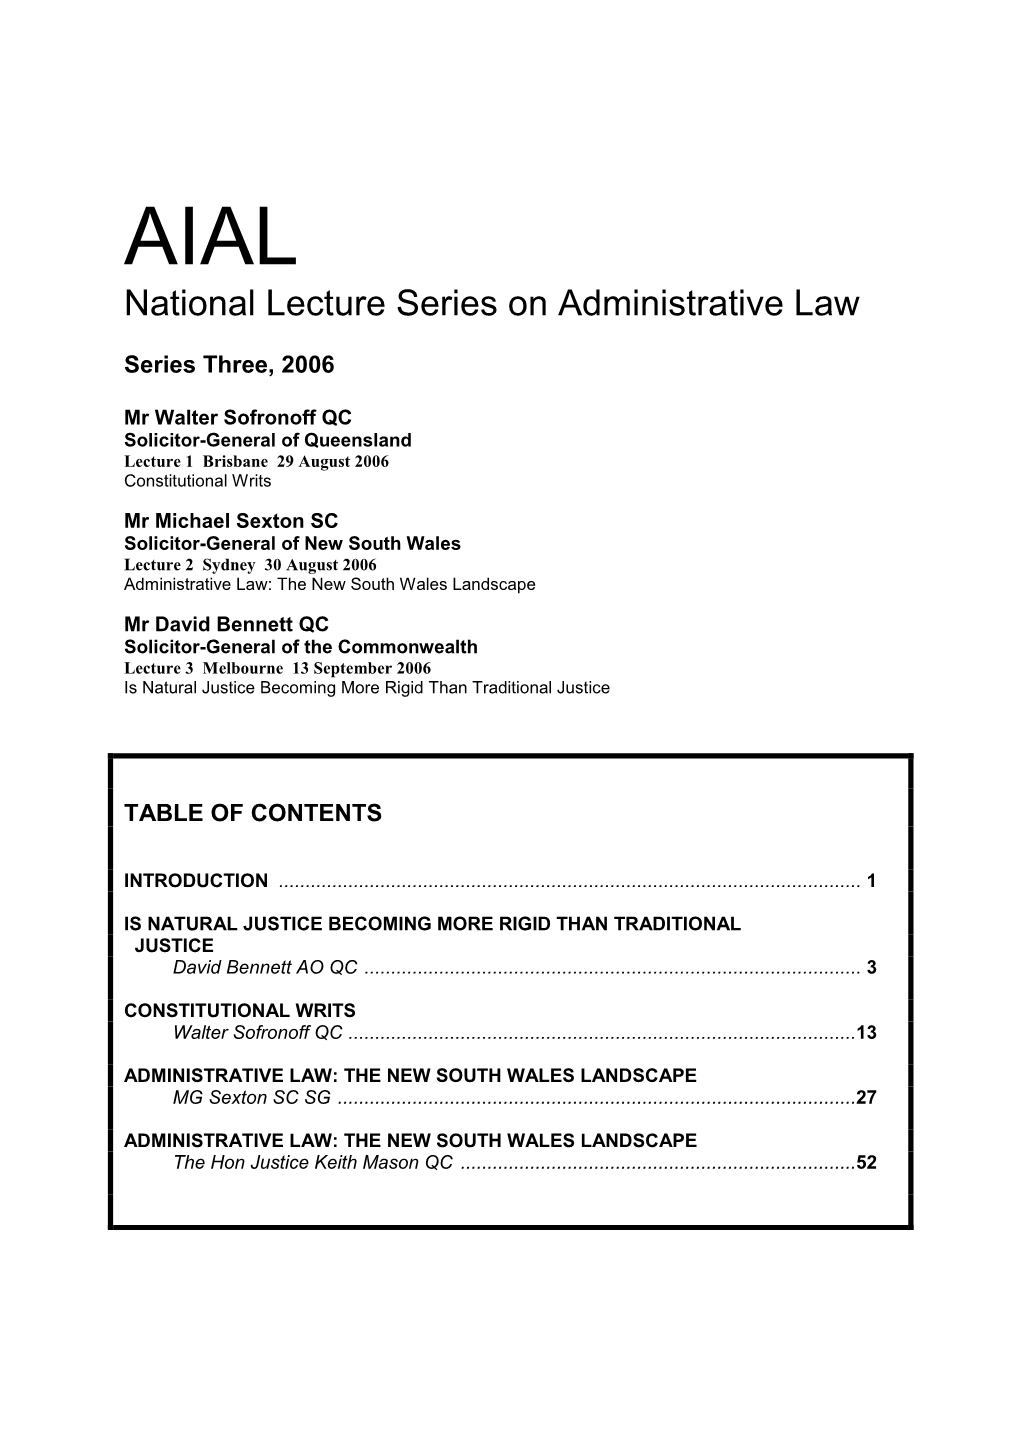 AIAL National Lecture Series on Administrative Law